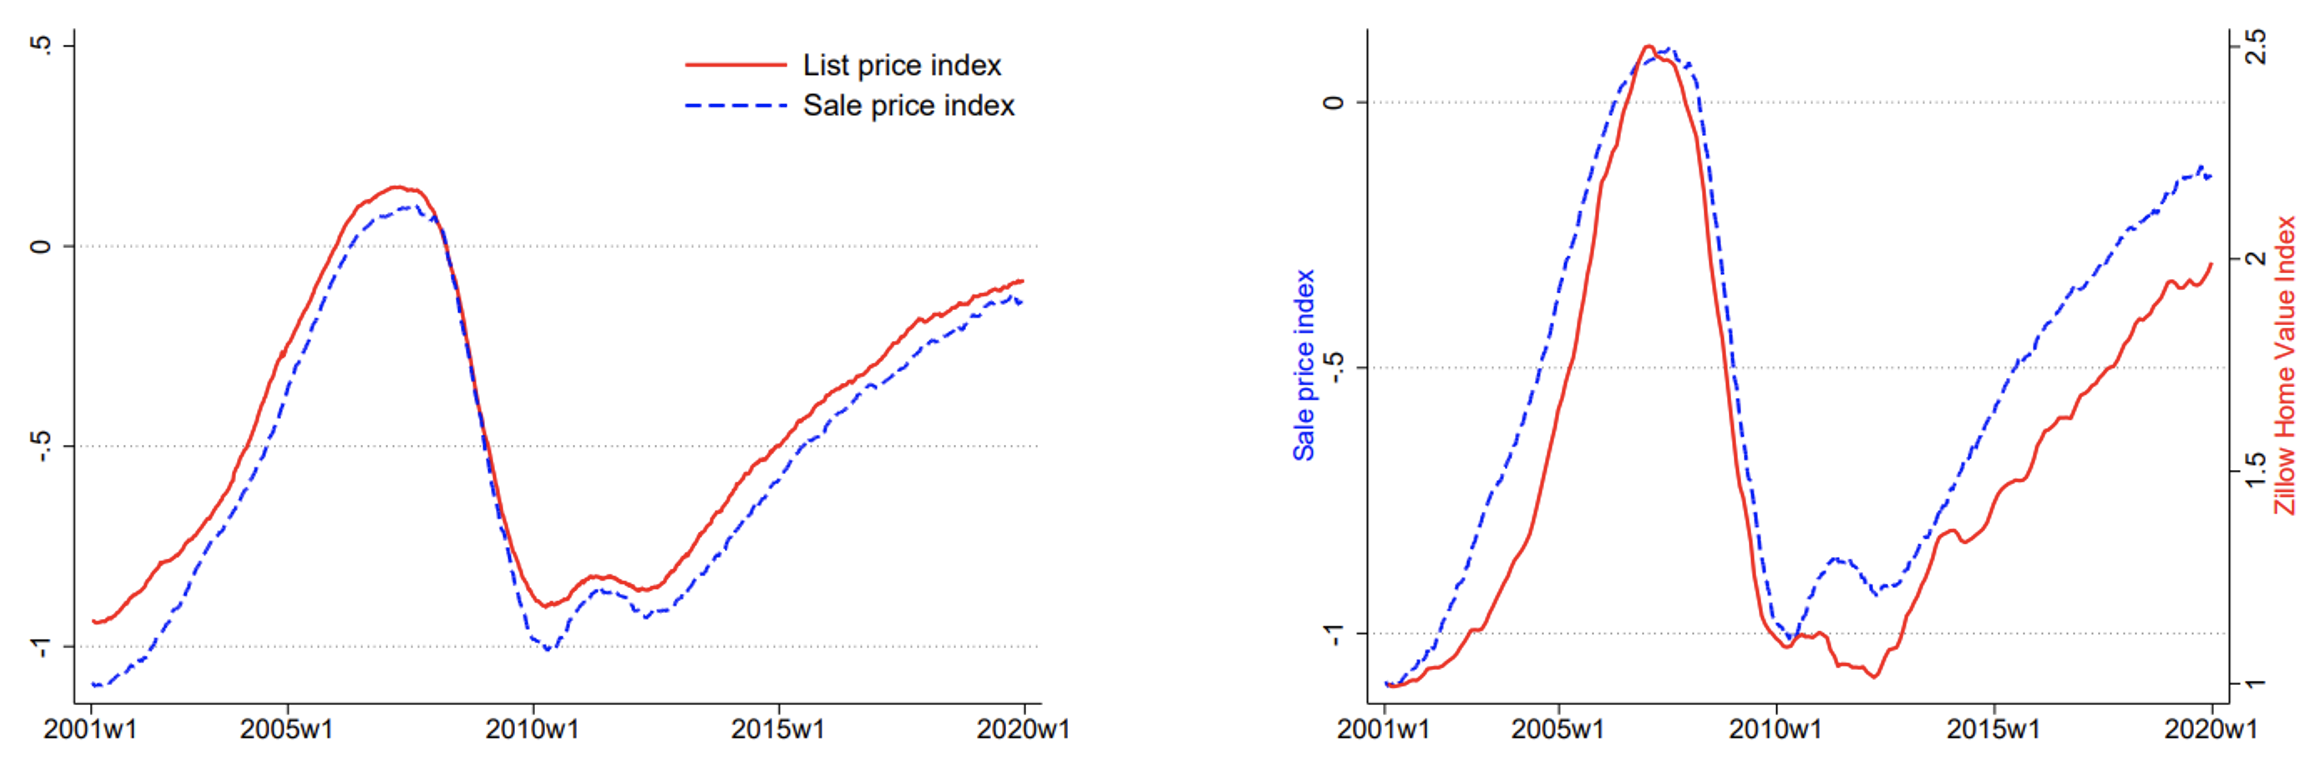 Figure 1 List and sale price indices for Los Angeles